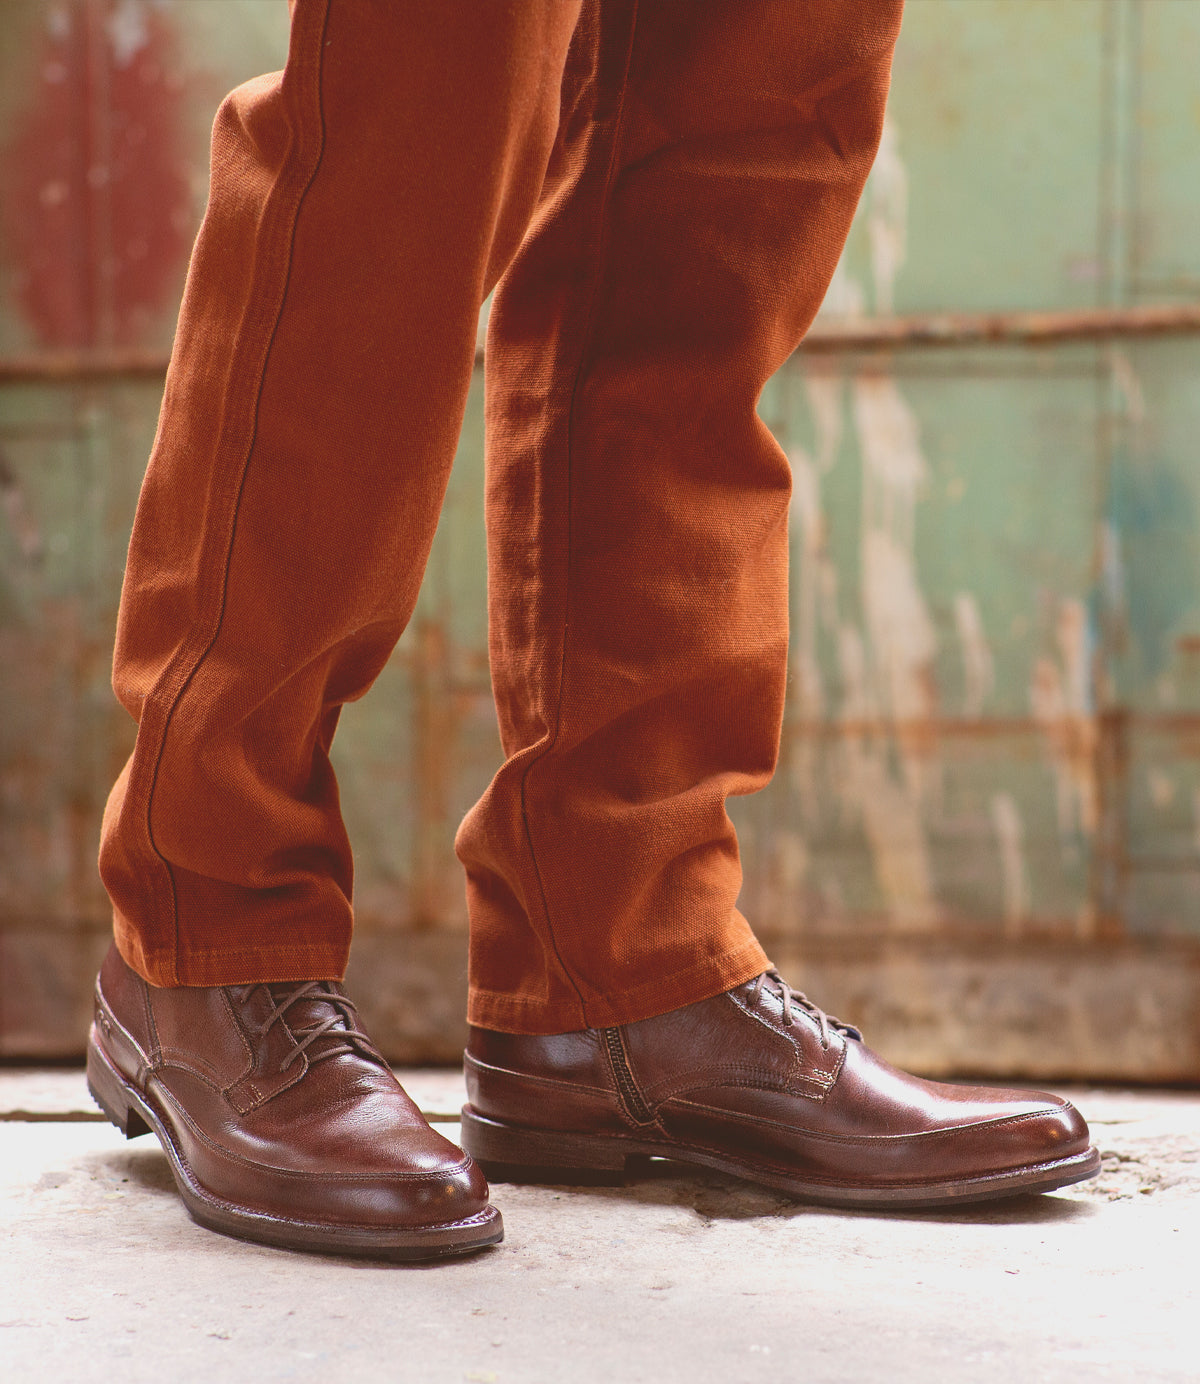 Close-up of a person's lower legs wearing brown corduroy pants and Bed Stu polished brown leather lace-up ankle boots, standing in front of a weathered metal backdrop.